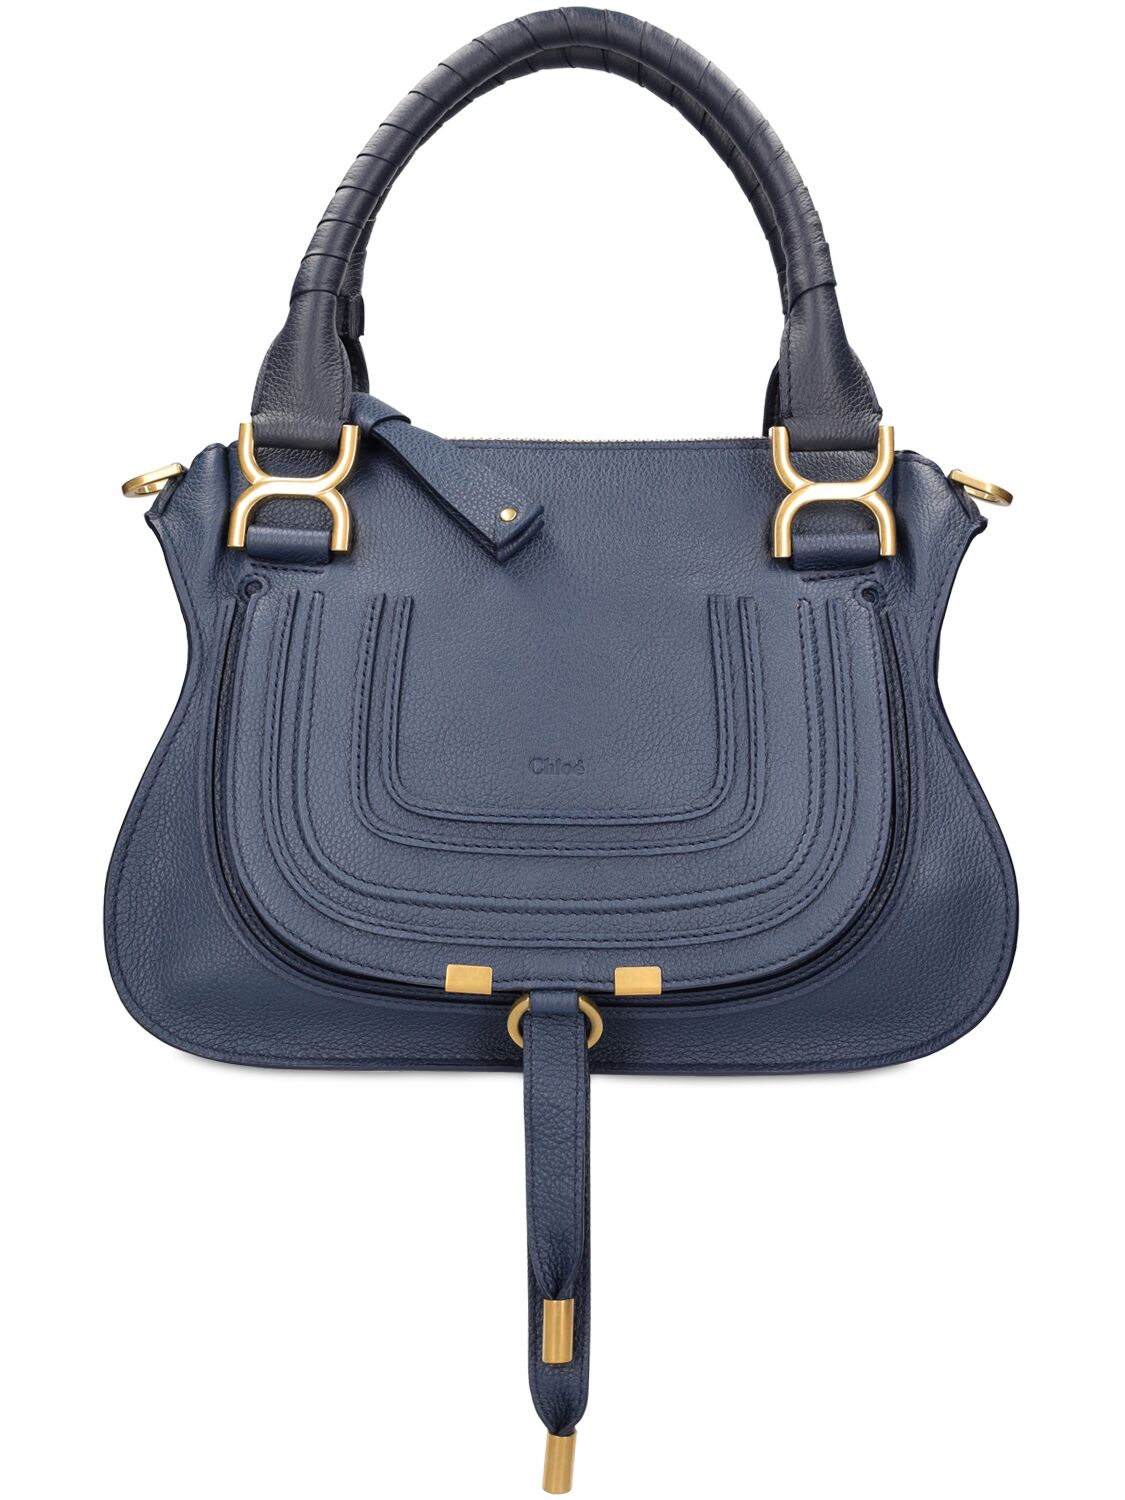 Chloé Small Marcie Leather Shoulder Bag In Navy